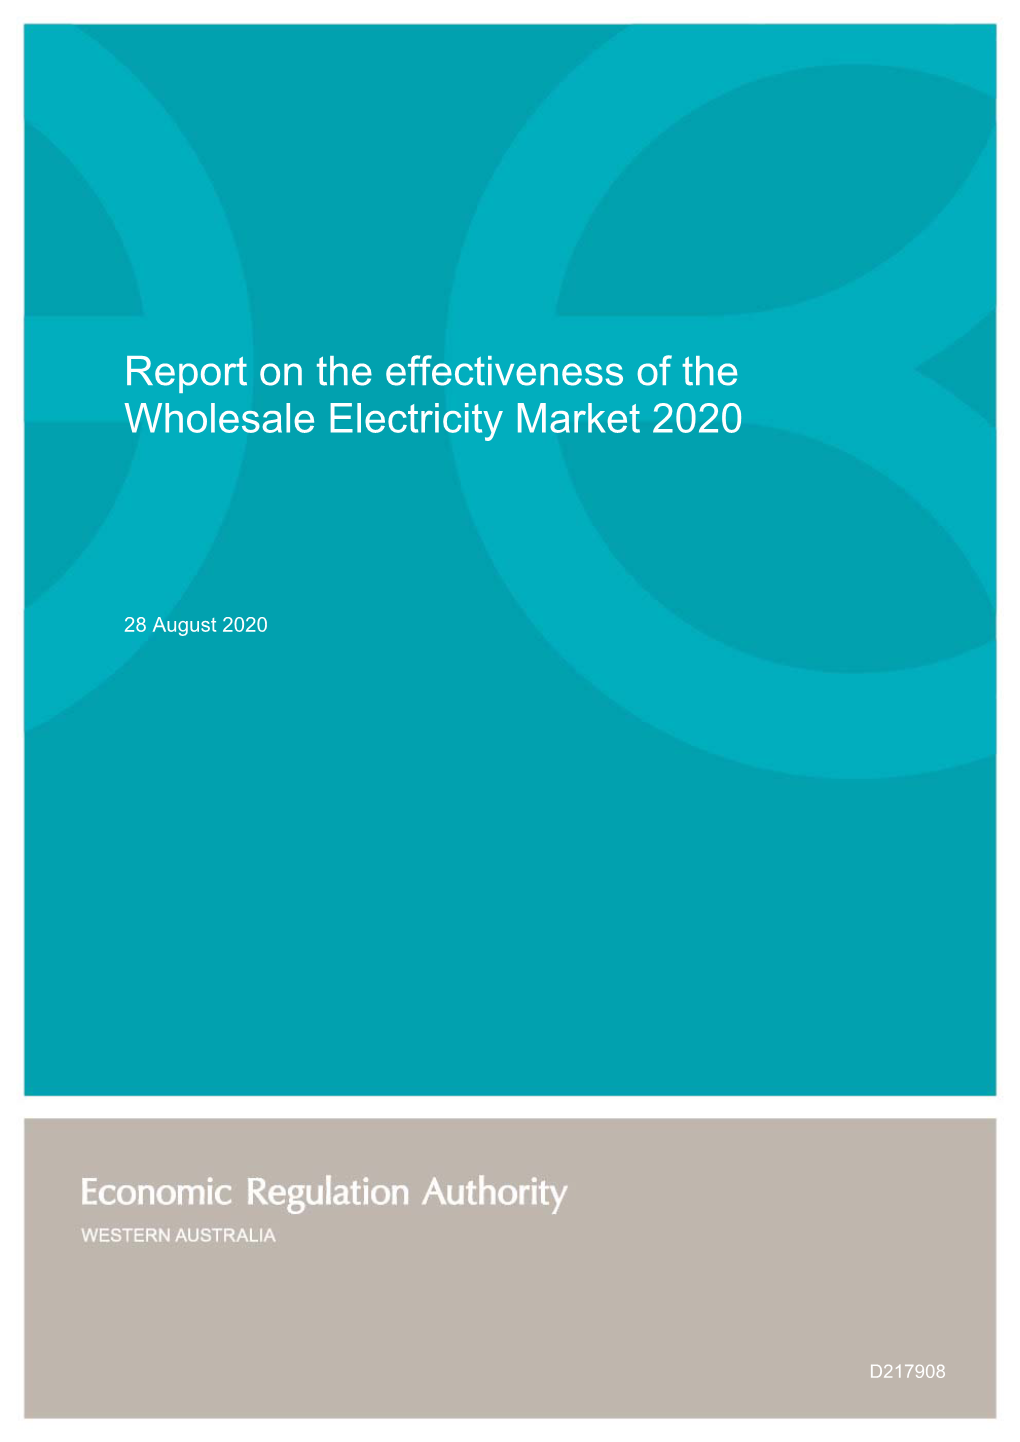 Report on the Effectiveness of the Wholesale Electricity Market 2020